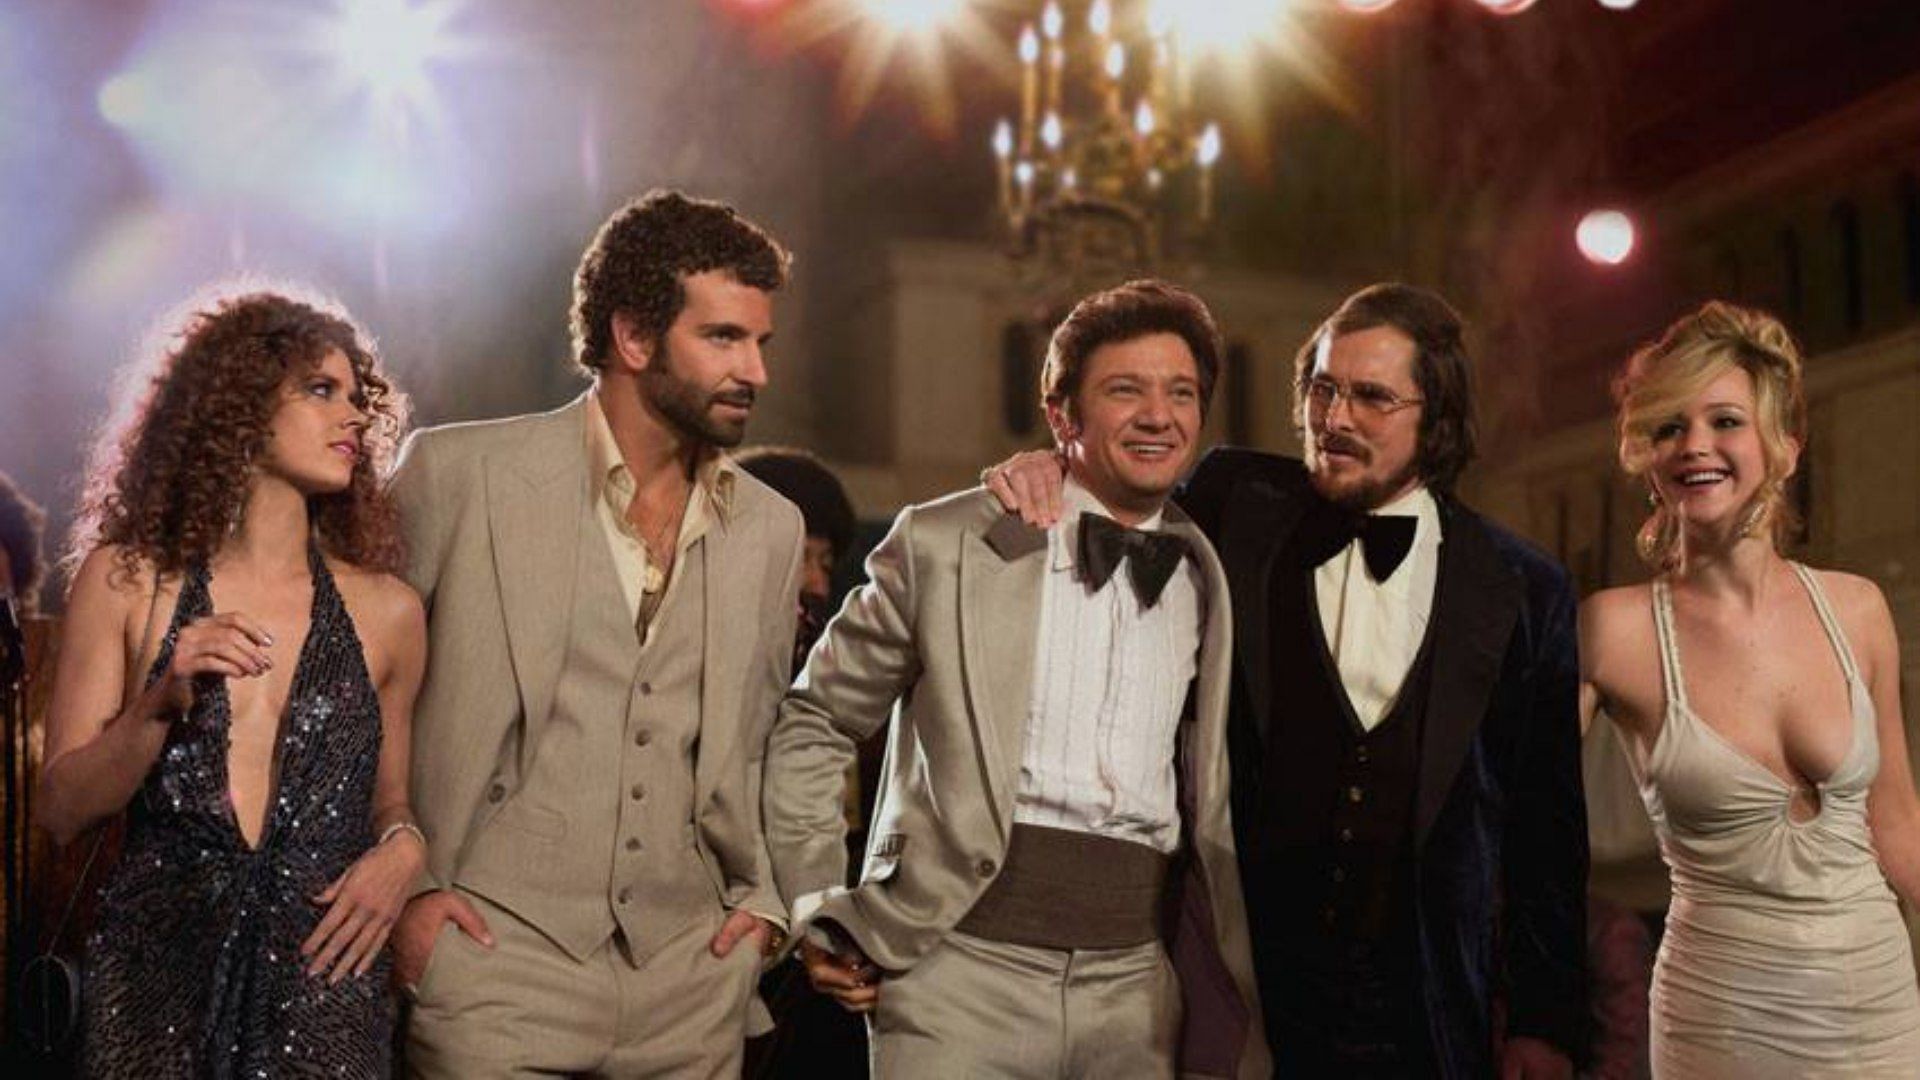 A still from the movie American Hustle starring Christian Bale (Image via Facebook/American Hustle)